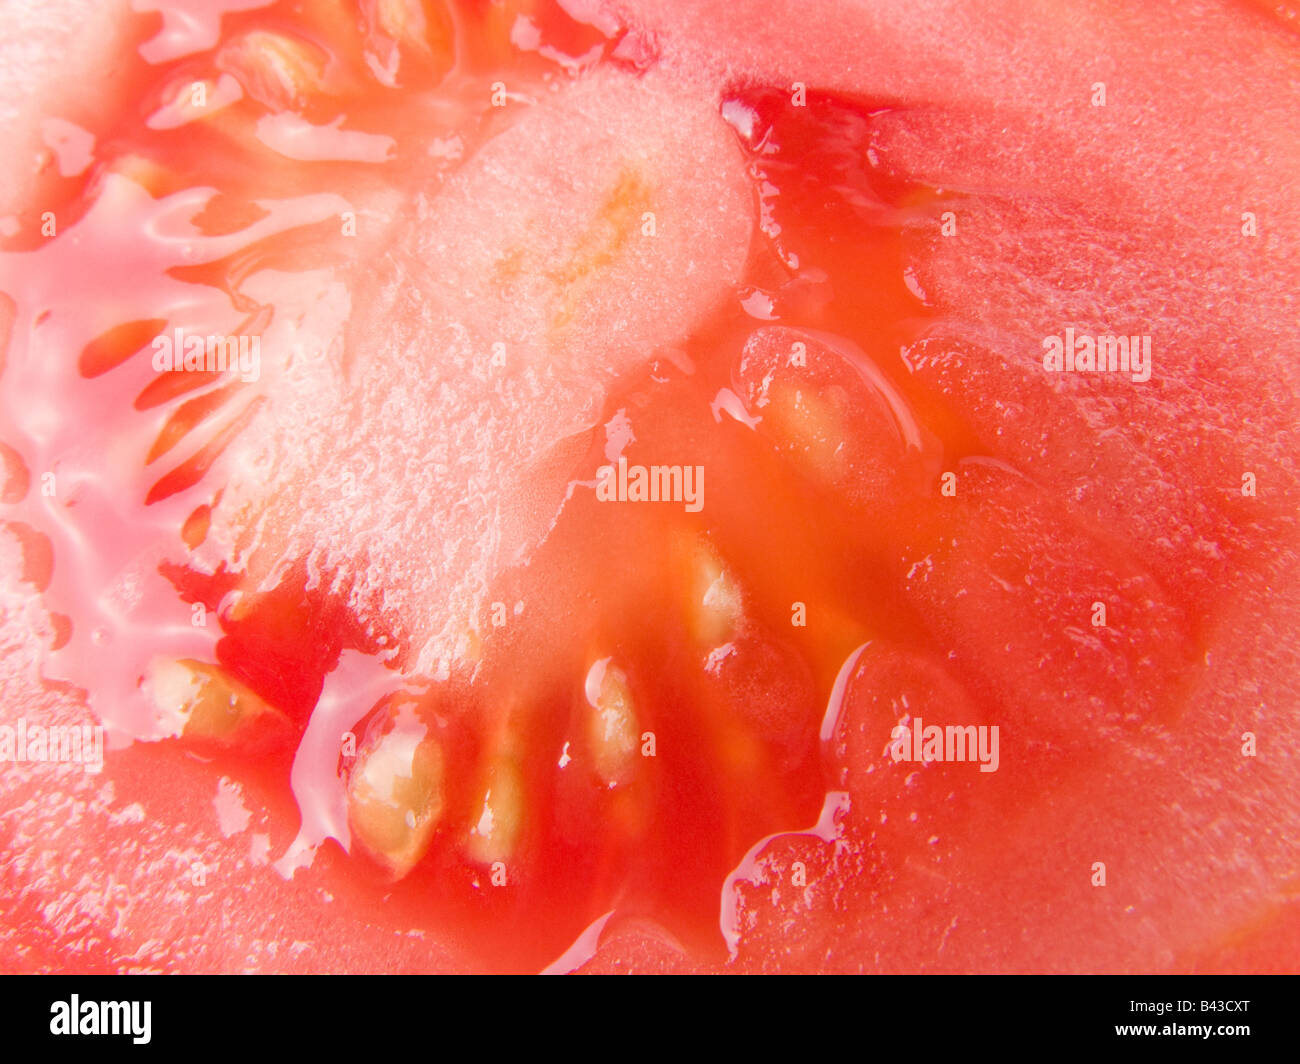 Close up of the interior of a ripe tomato with seeds Stock Photo